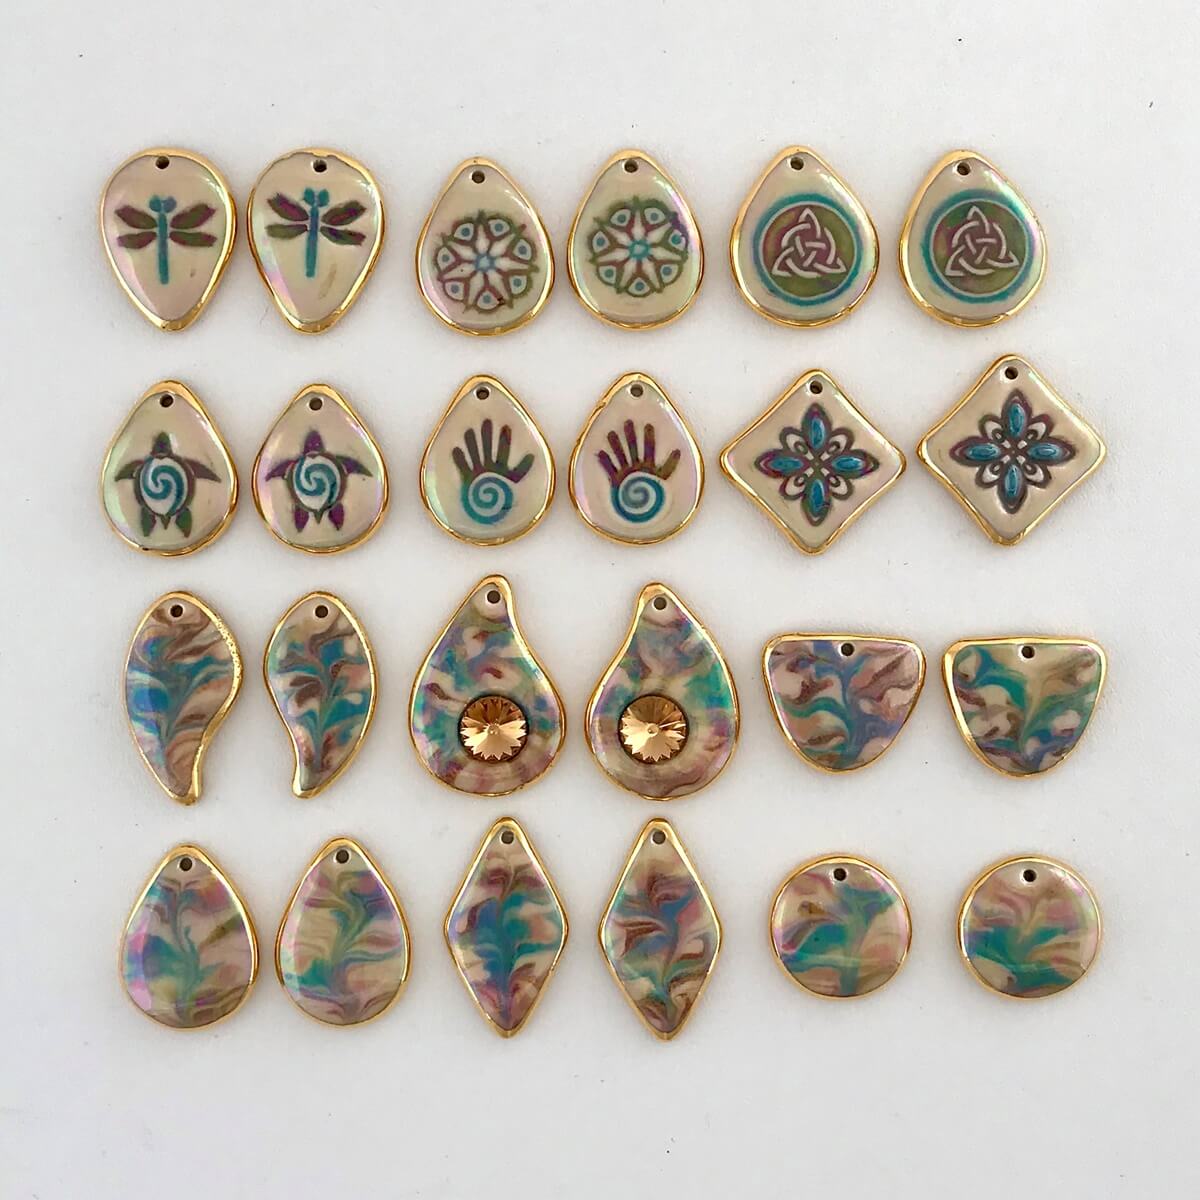 Earring components in our popular southwest colors, shades of brown with turquoise accents.